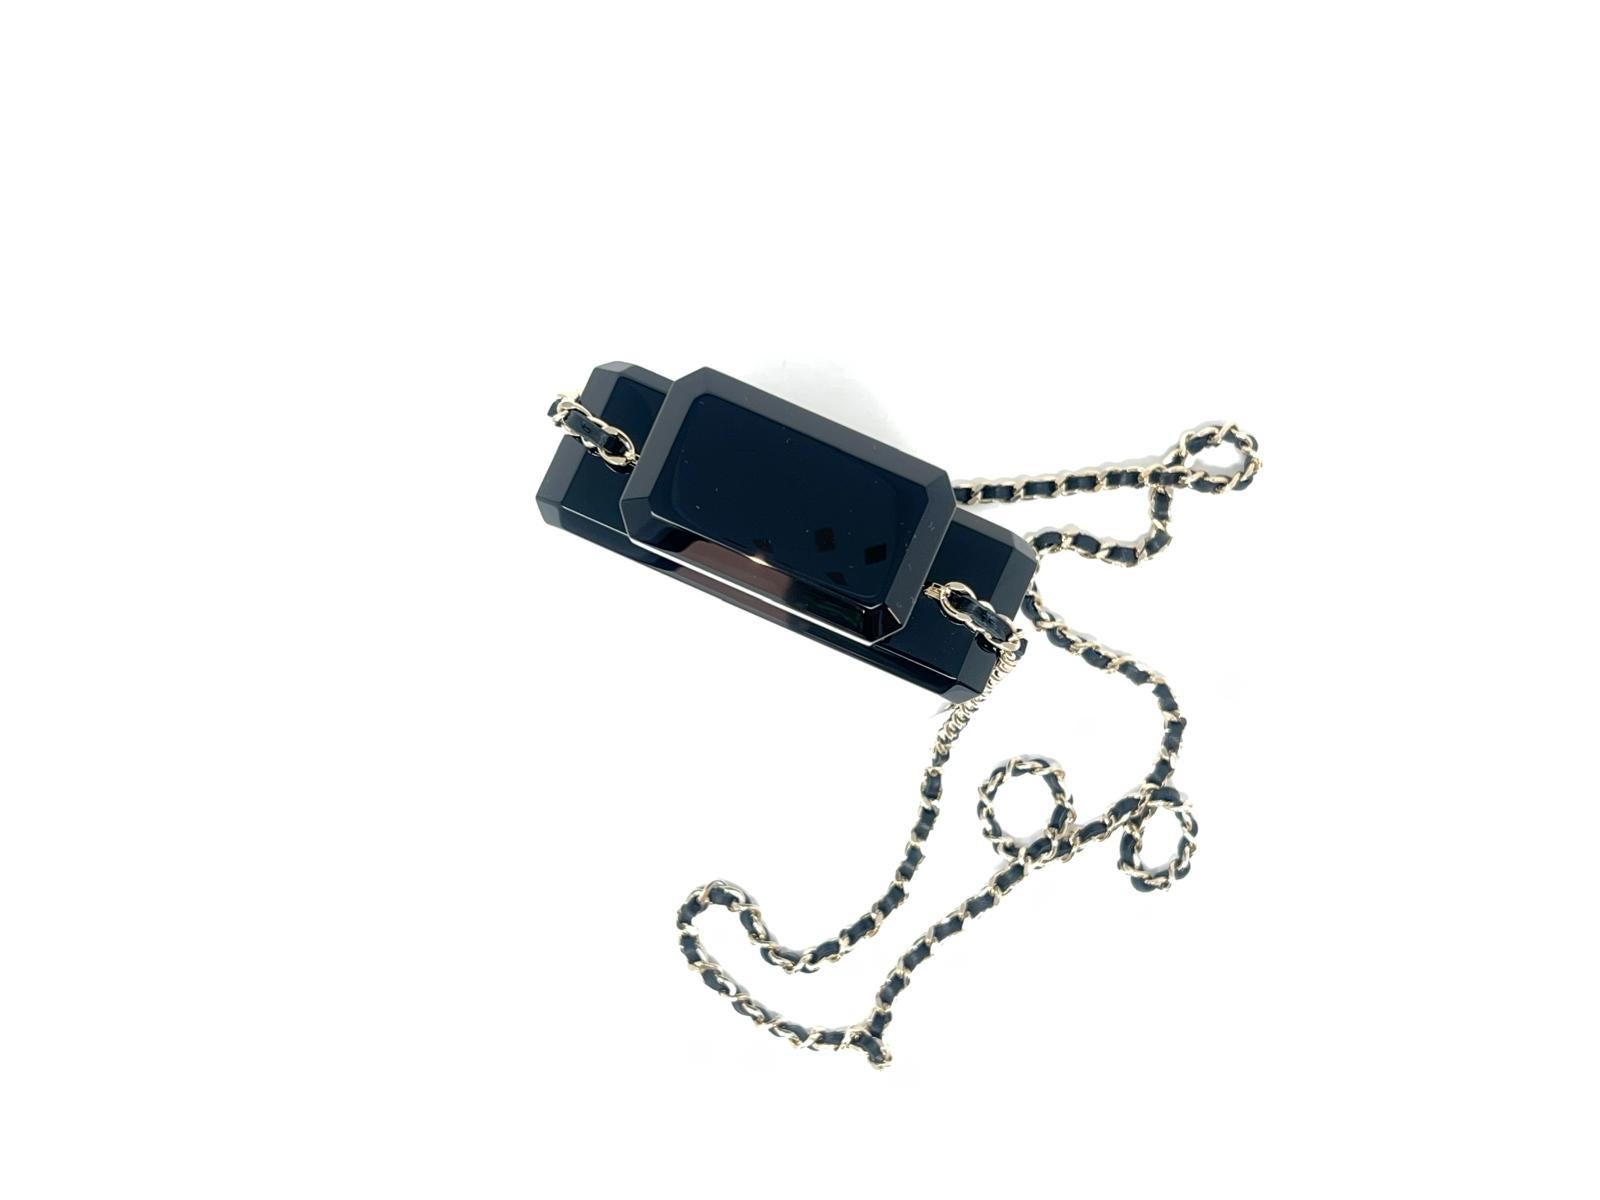 Chanel N5 Black Perfume Bottle Minaudière Cruise Collection 2013  For Sale 9